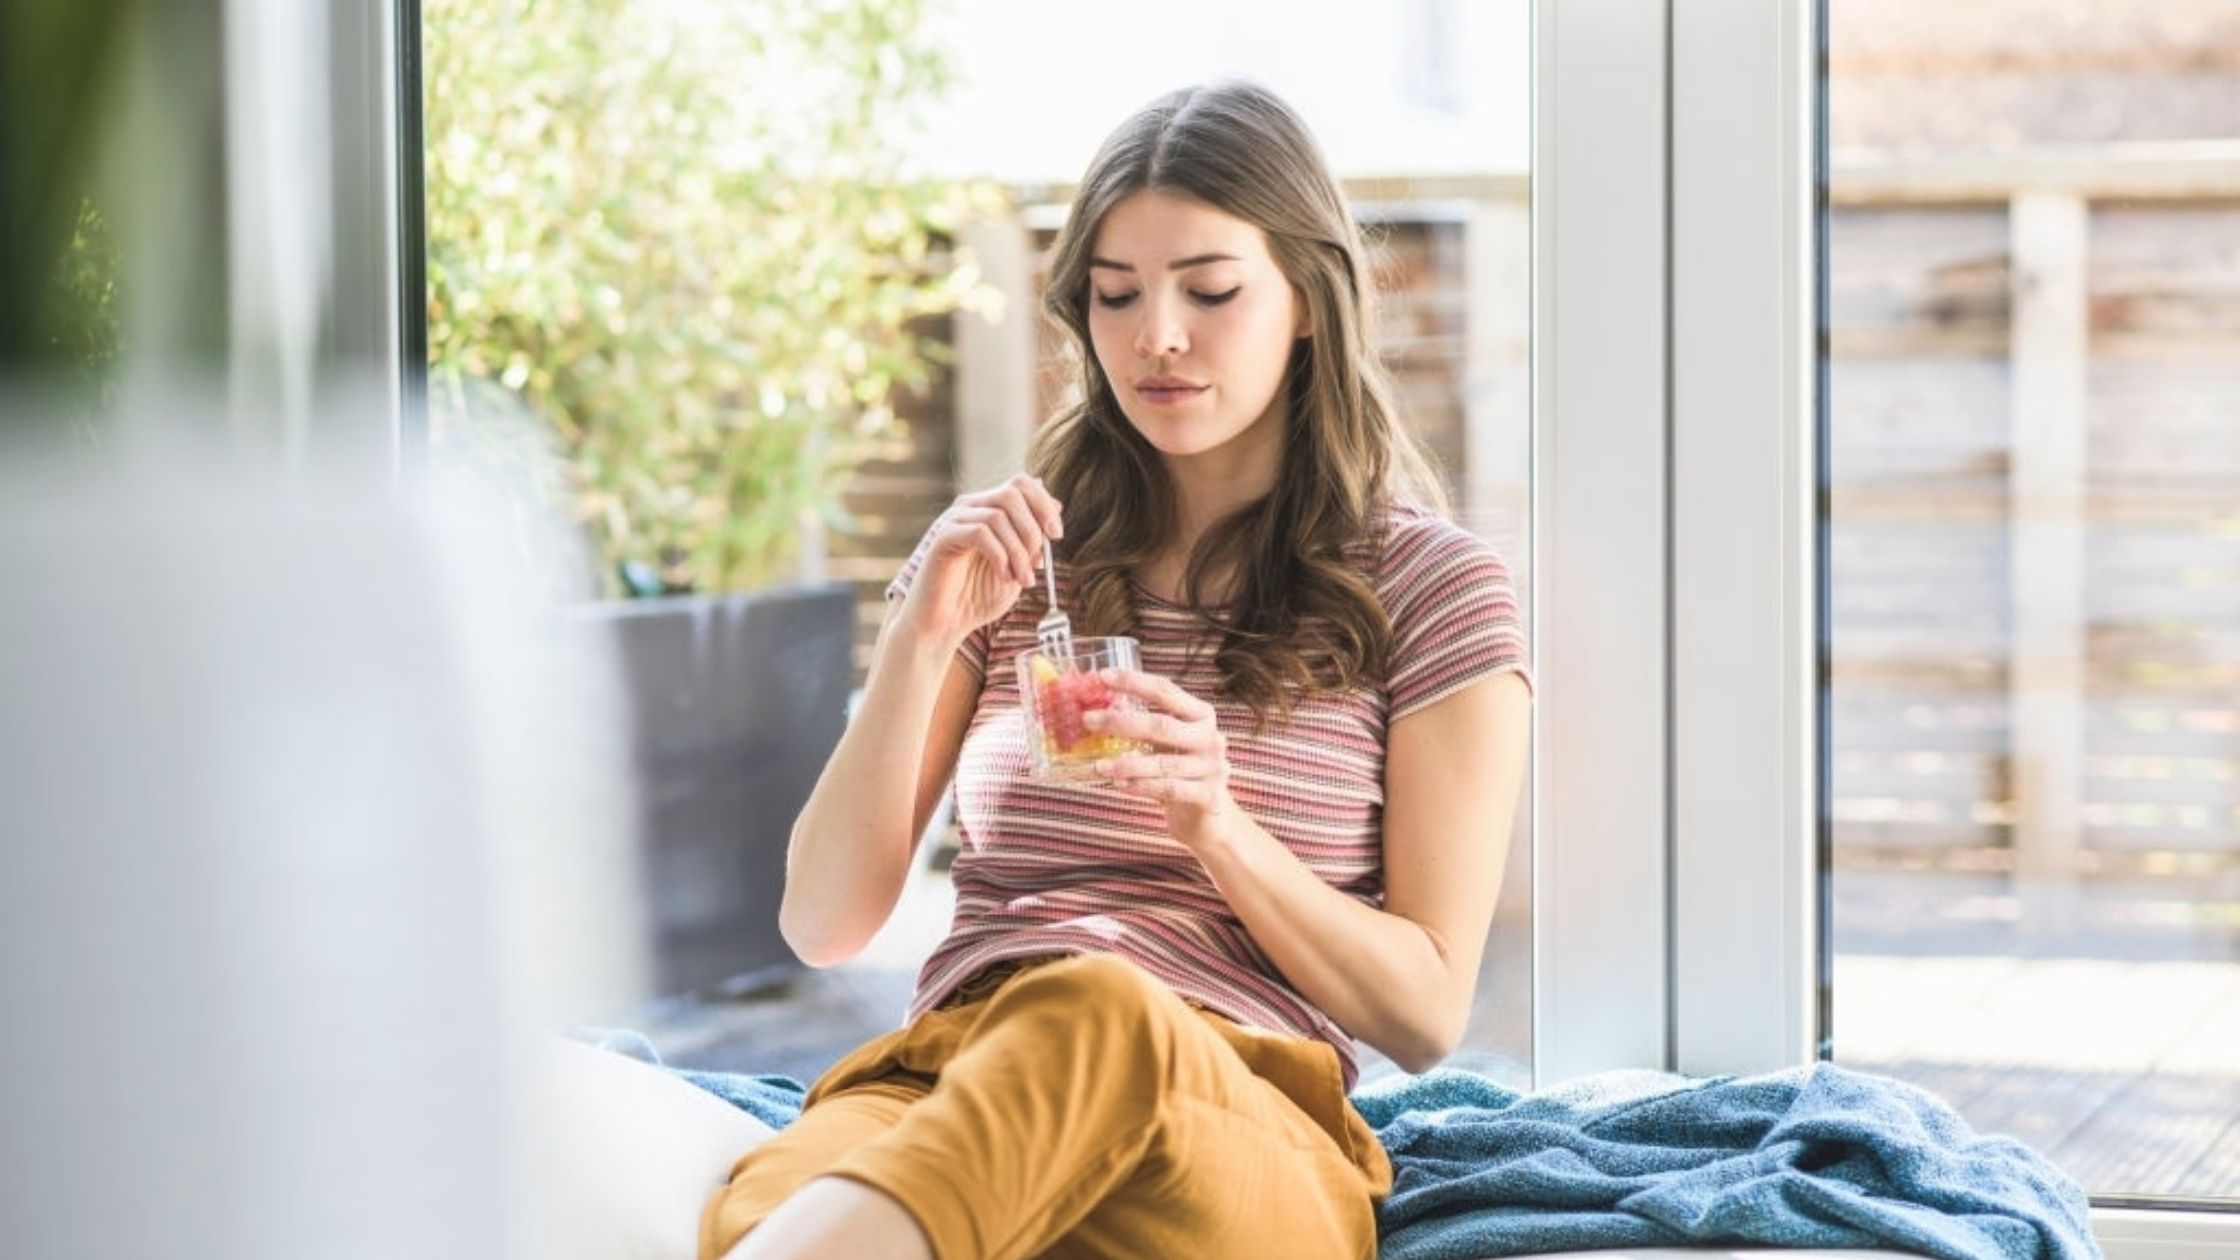 Women Have Higher Heart Risk Associated With Solo Eating